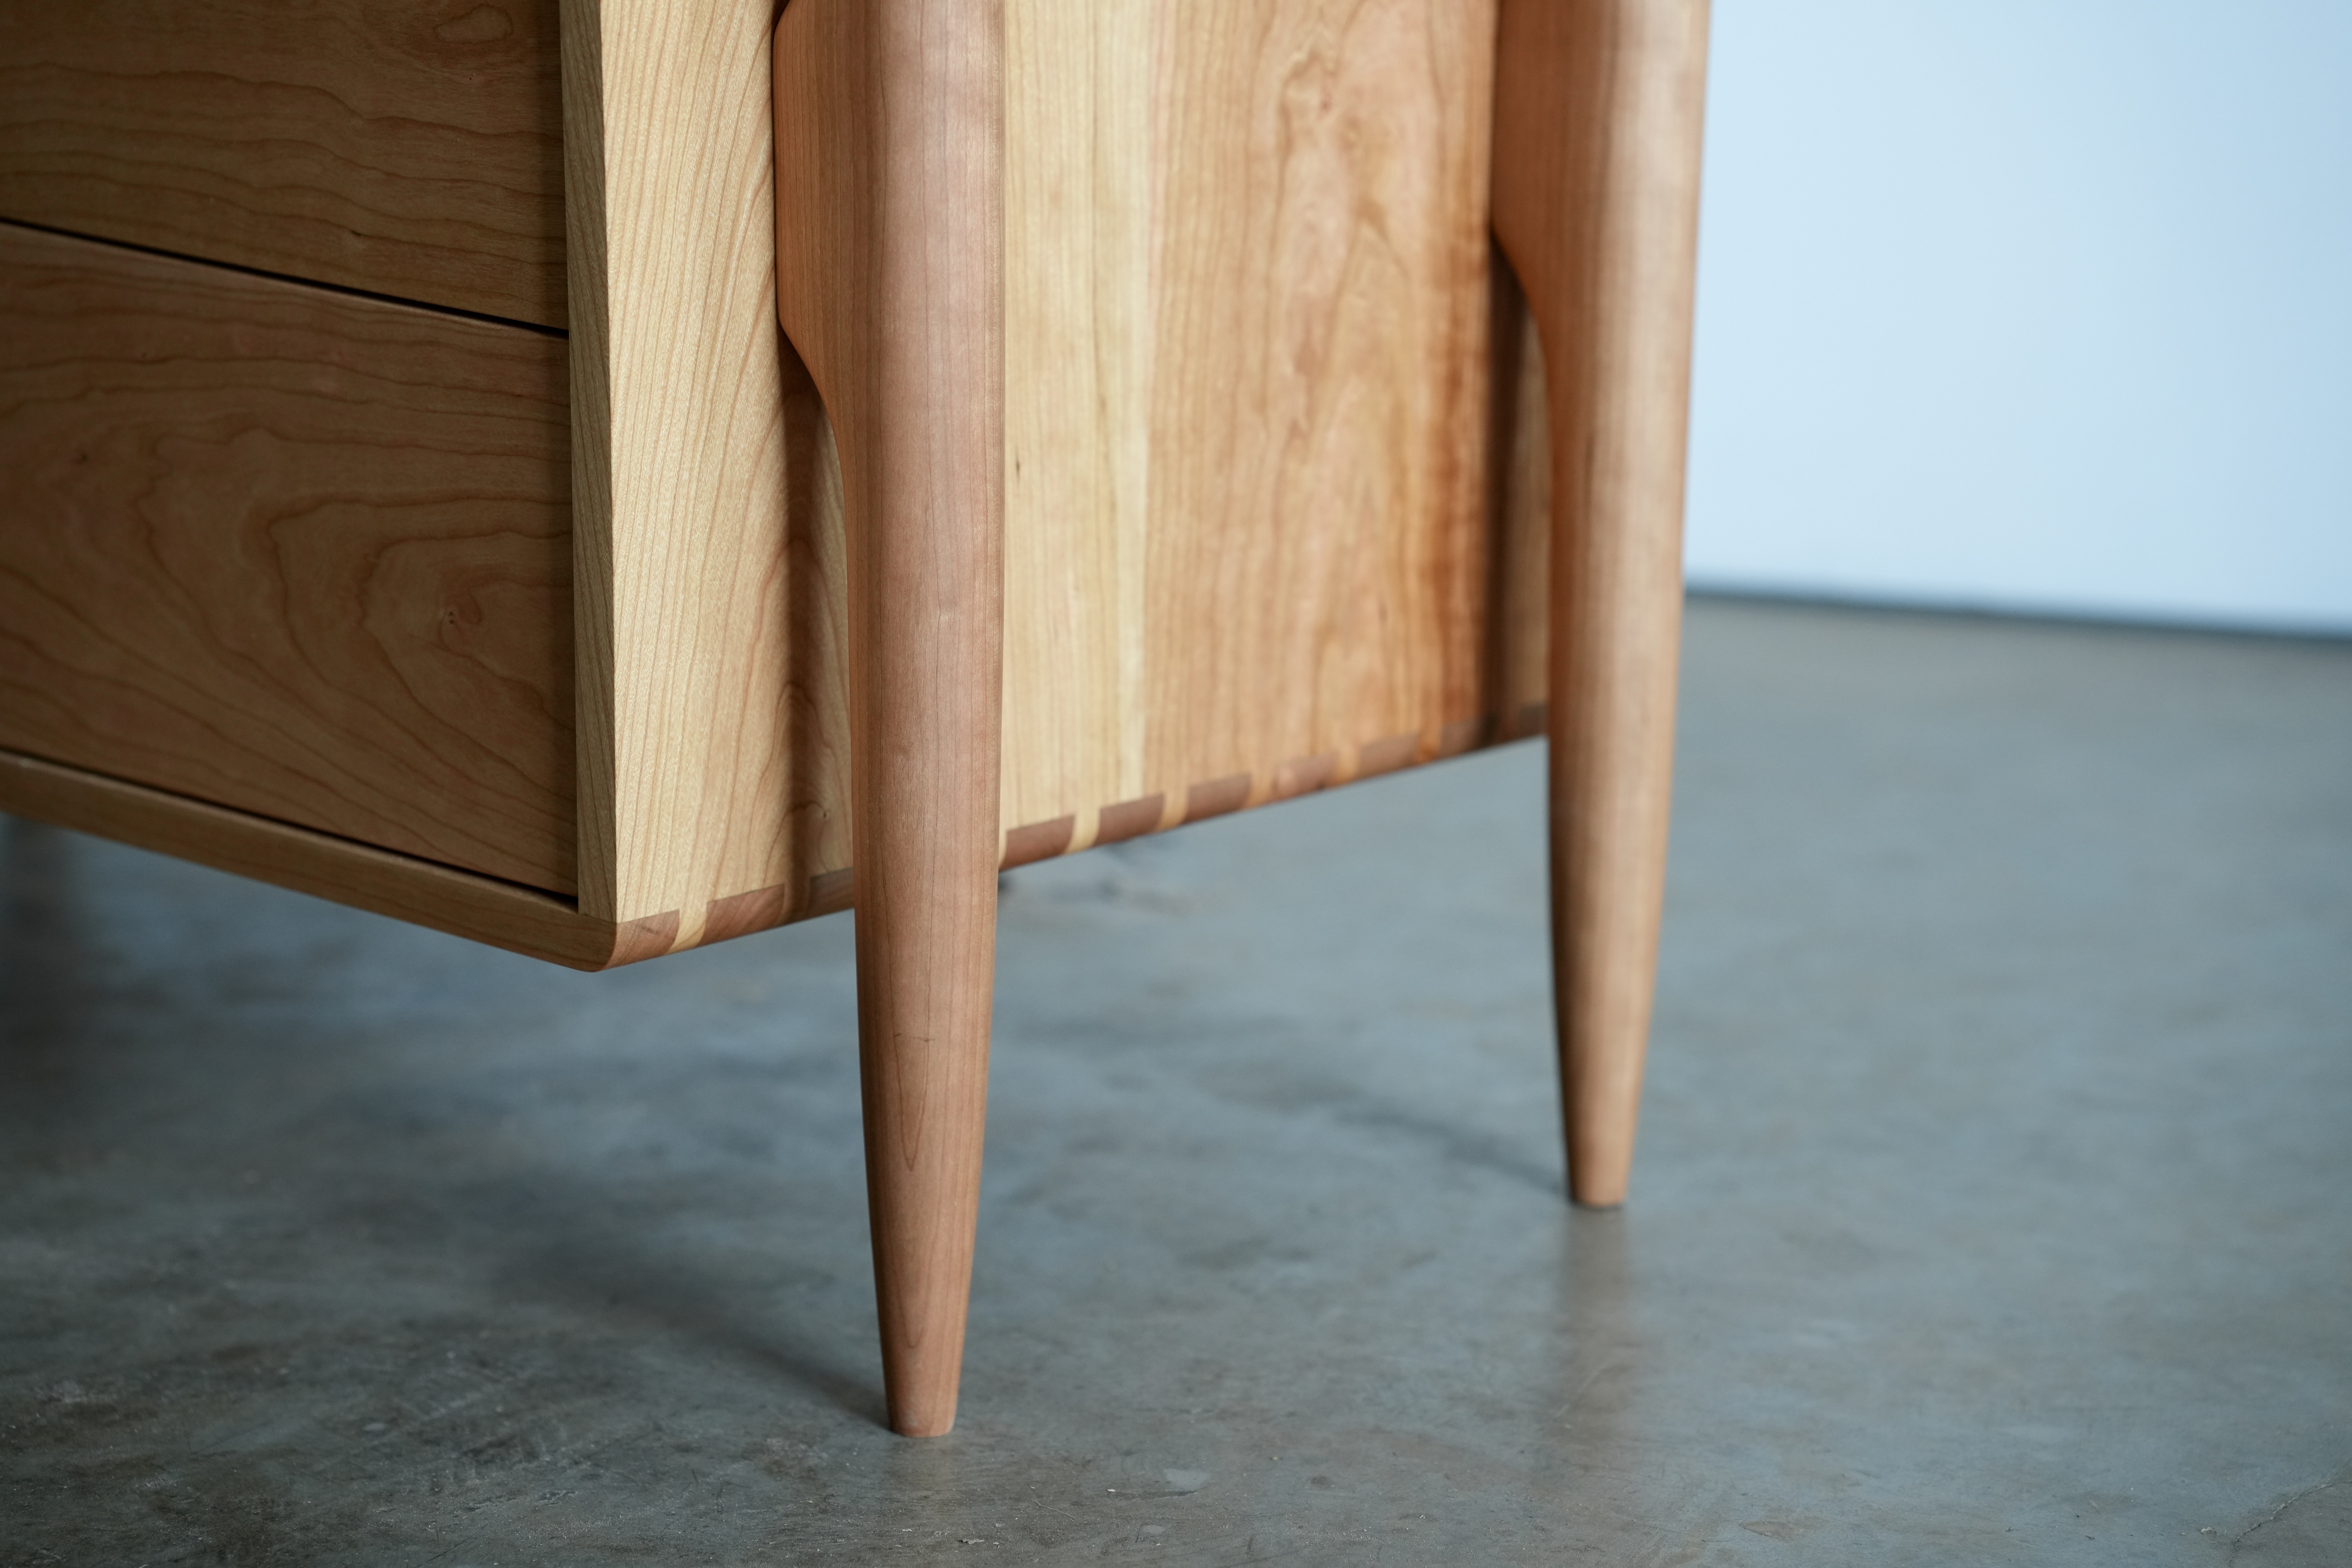 A close-up of the legs of a cherry midcentury modern dresser